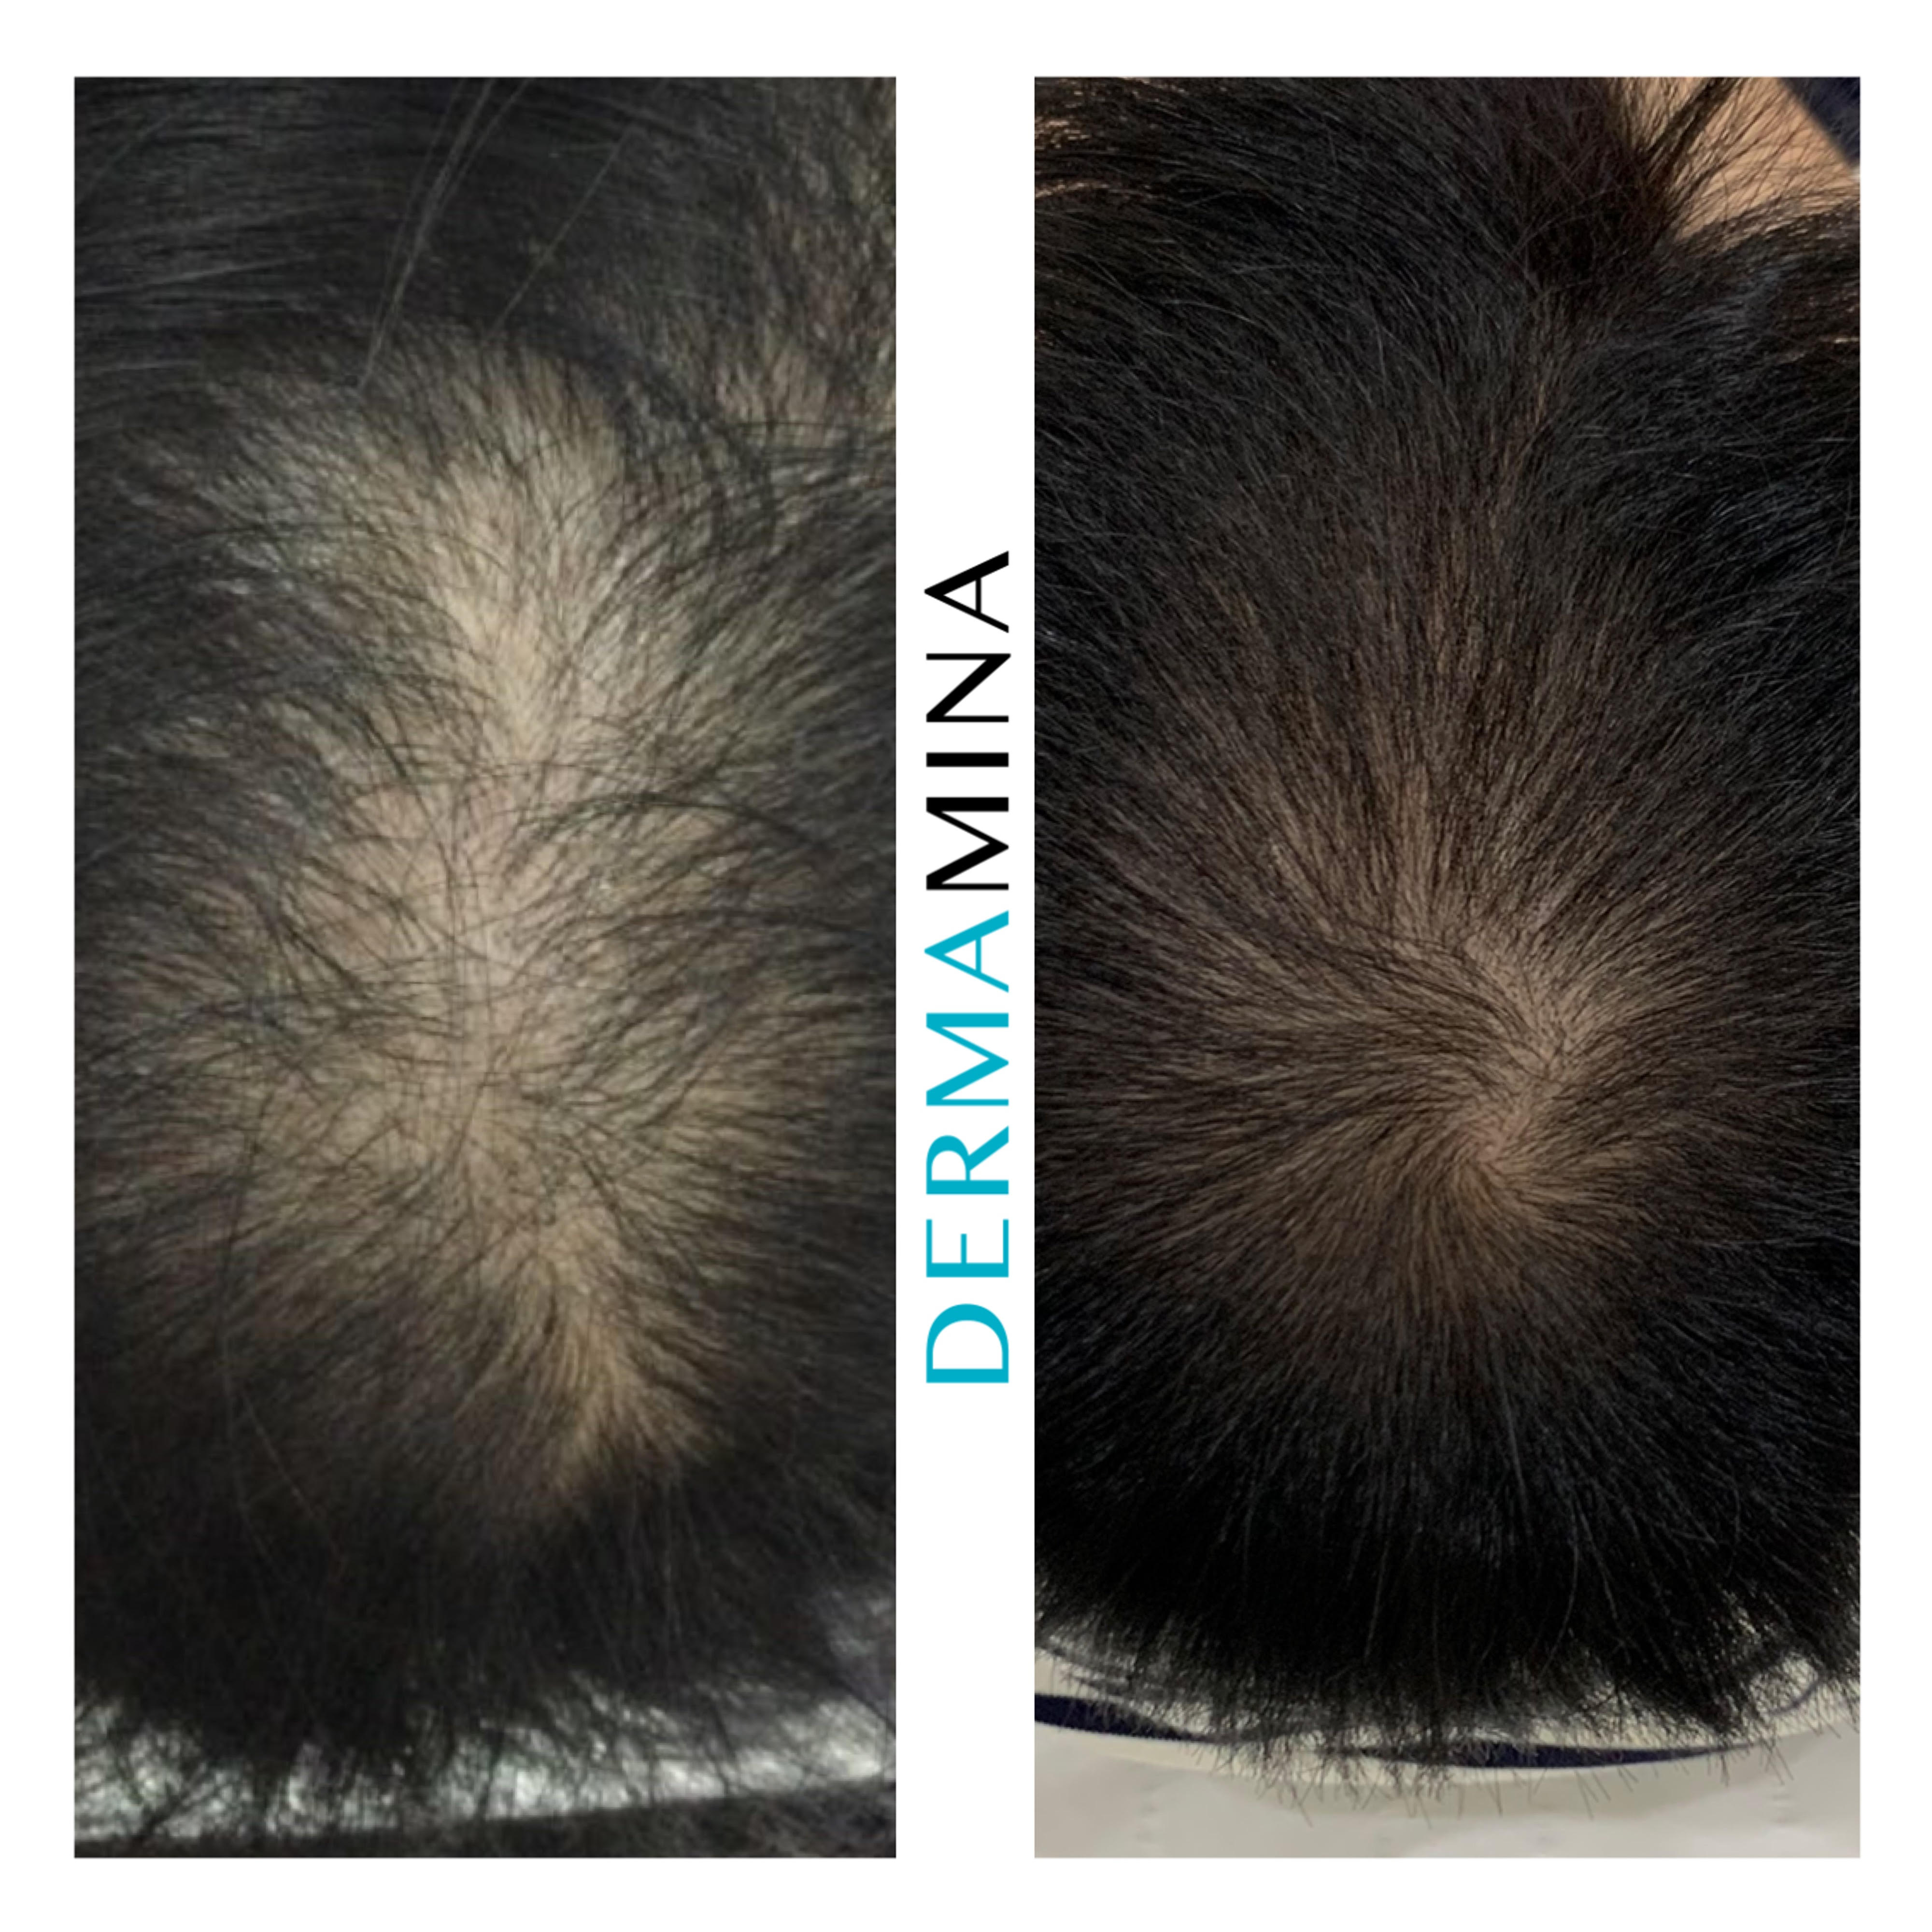 Hair Loss Treatment Before and After